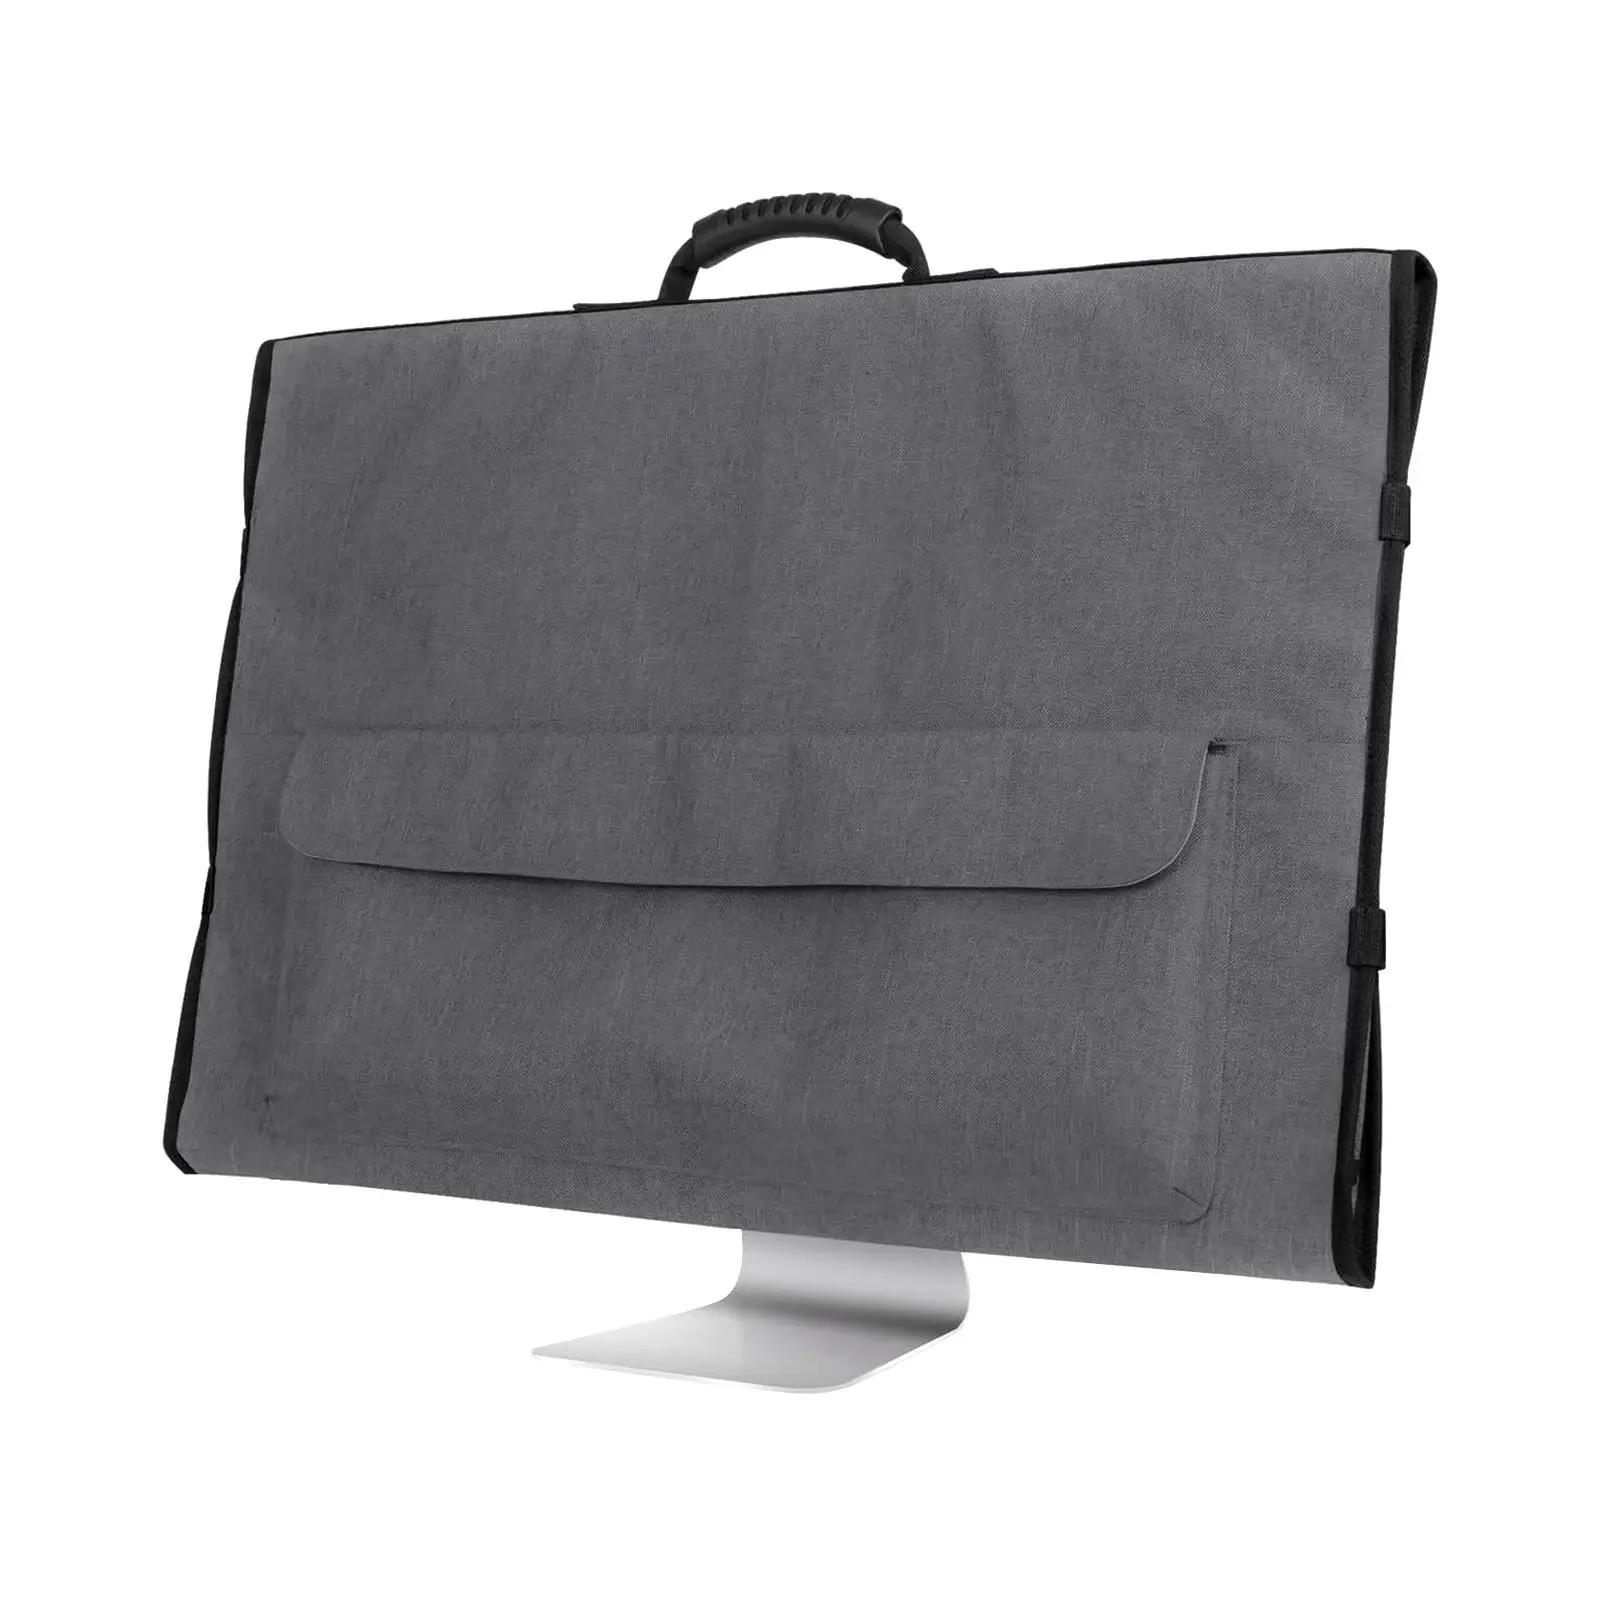 27inch Monitor Carrying Case Adjustable Buckle Anti Scratch Padded Travel Carrying Bag Protective Case for Desktop Computer